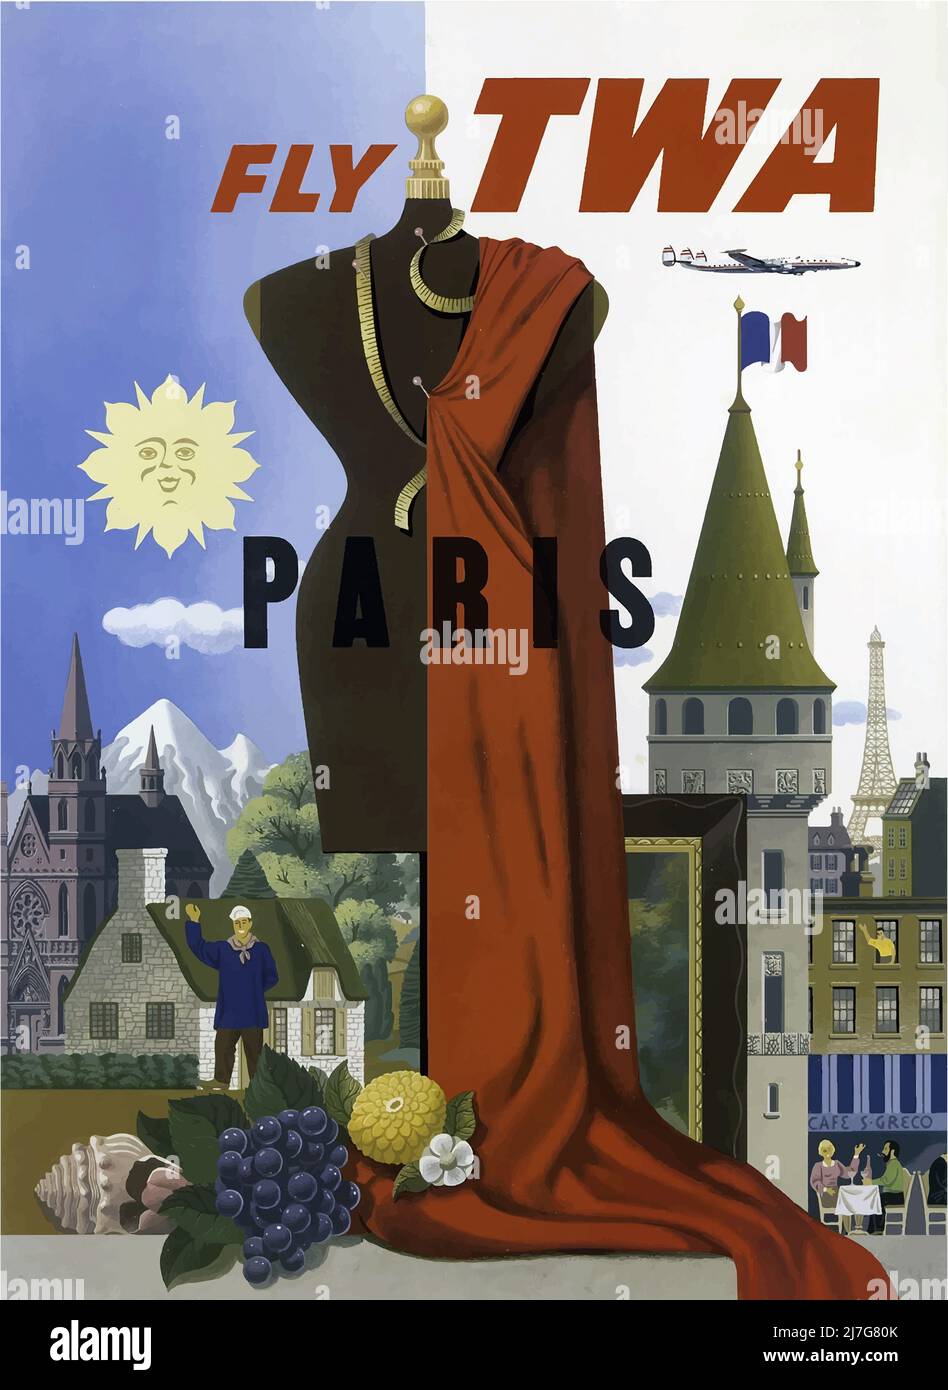 Vintage 1960s Travel Poster Fly TWA, To Paris , TWA – Trans World Airlines. High resolution poster. Stock Photo